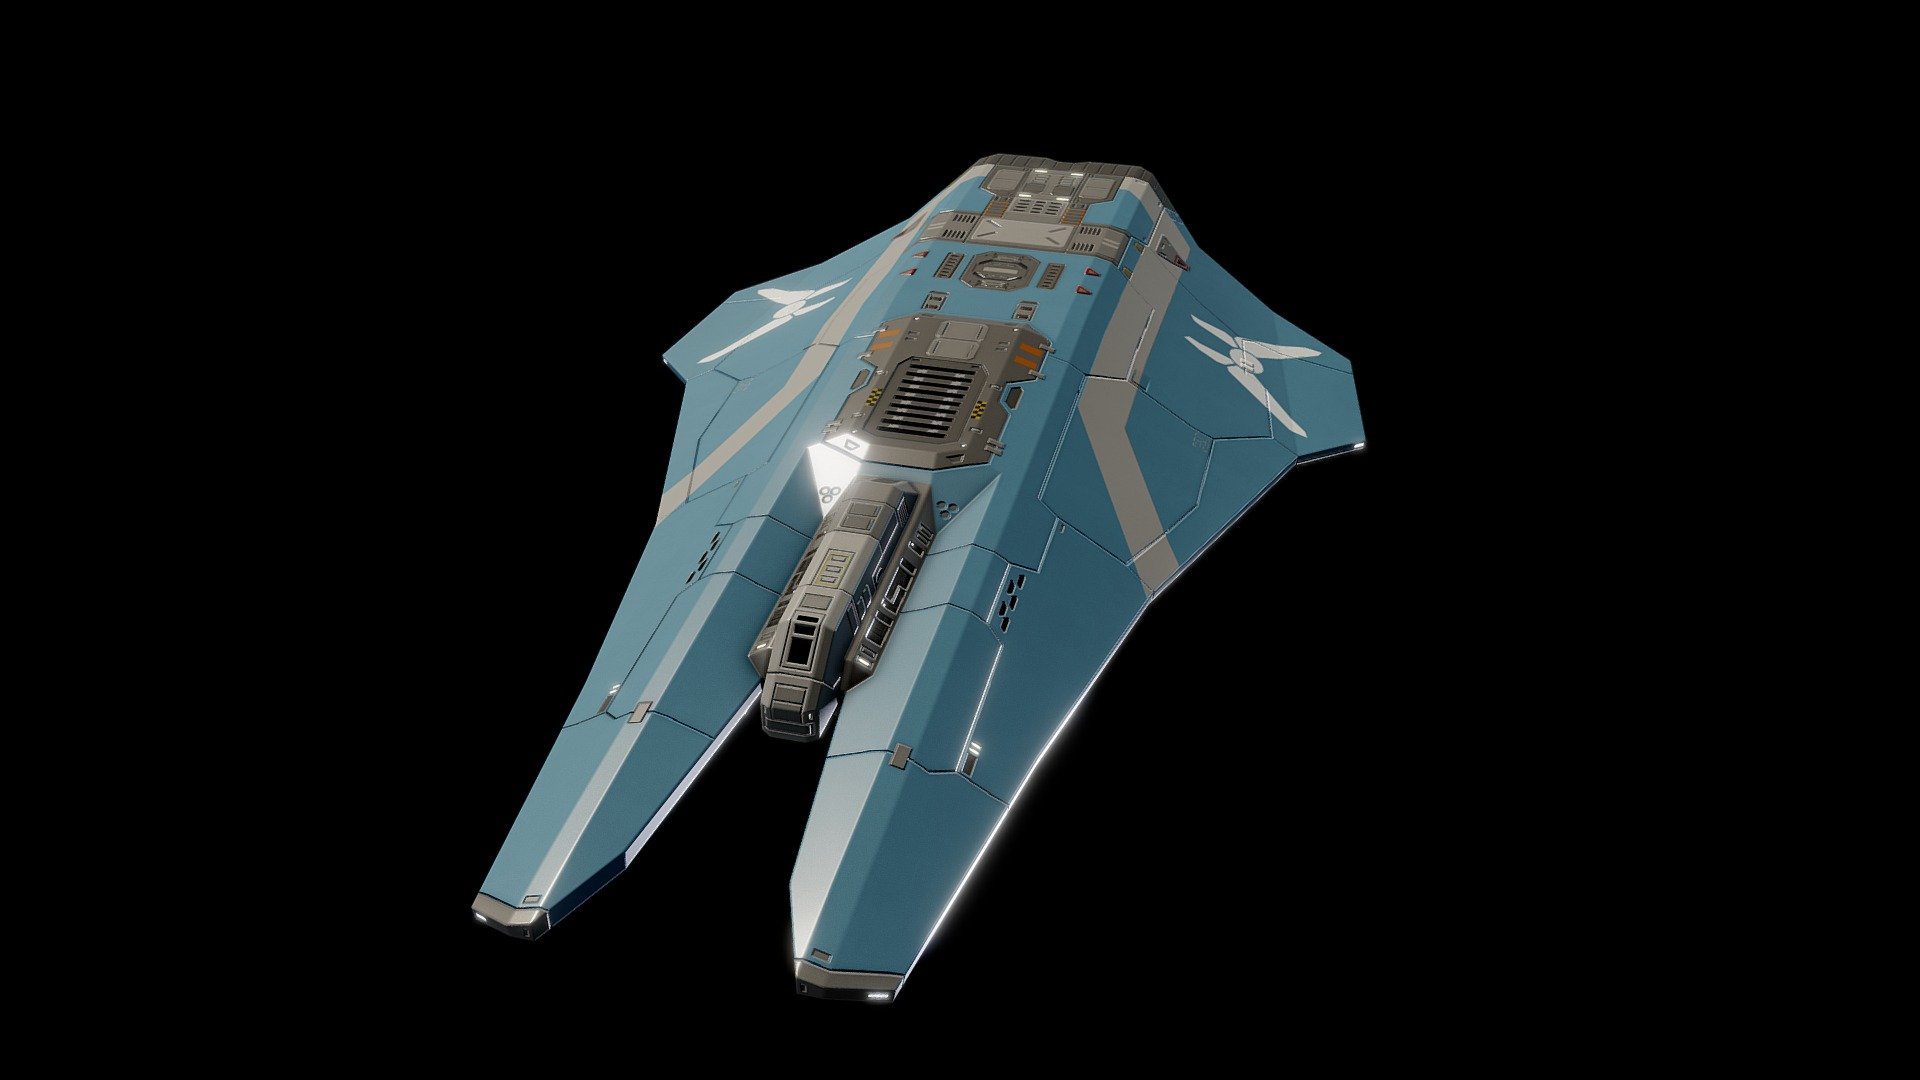 Updated 3.2017

This model was made for my mod. By me.

Mod website: http://www.moddb.com/mods/resurgence

Mod discussion forum: http://forums.gearboxsoftware.com/t/mod-resurgence-wip/1281543/162 - Hiigaran Advanced Interceptor - 3D model by Versaali (@unifin) 3d model